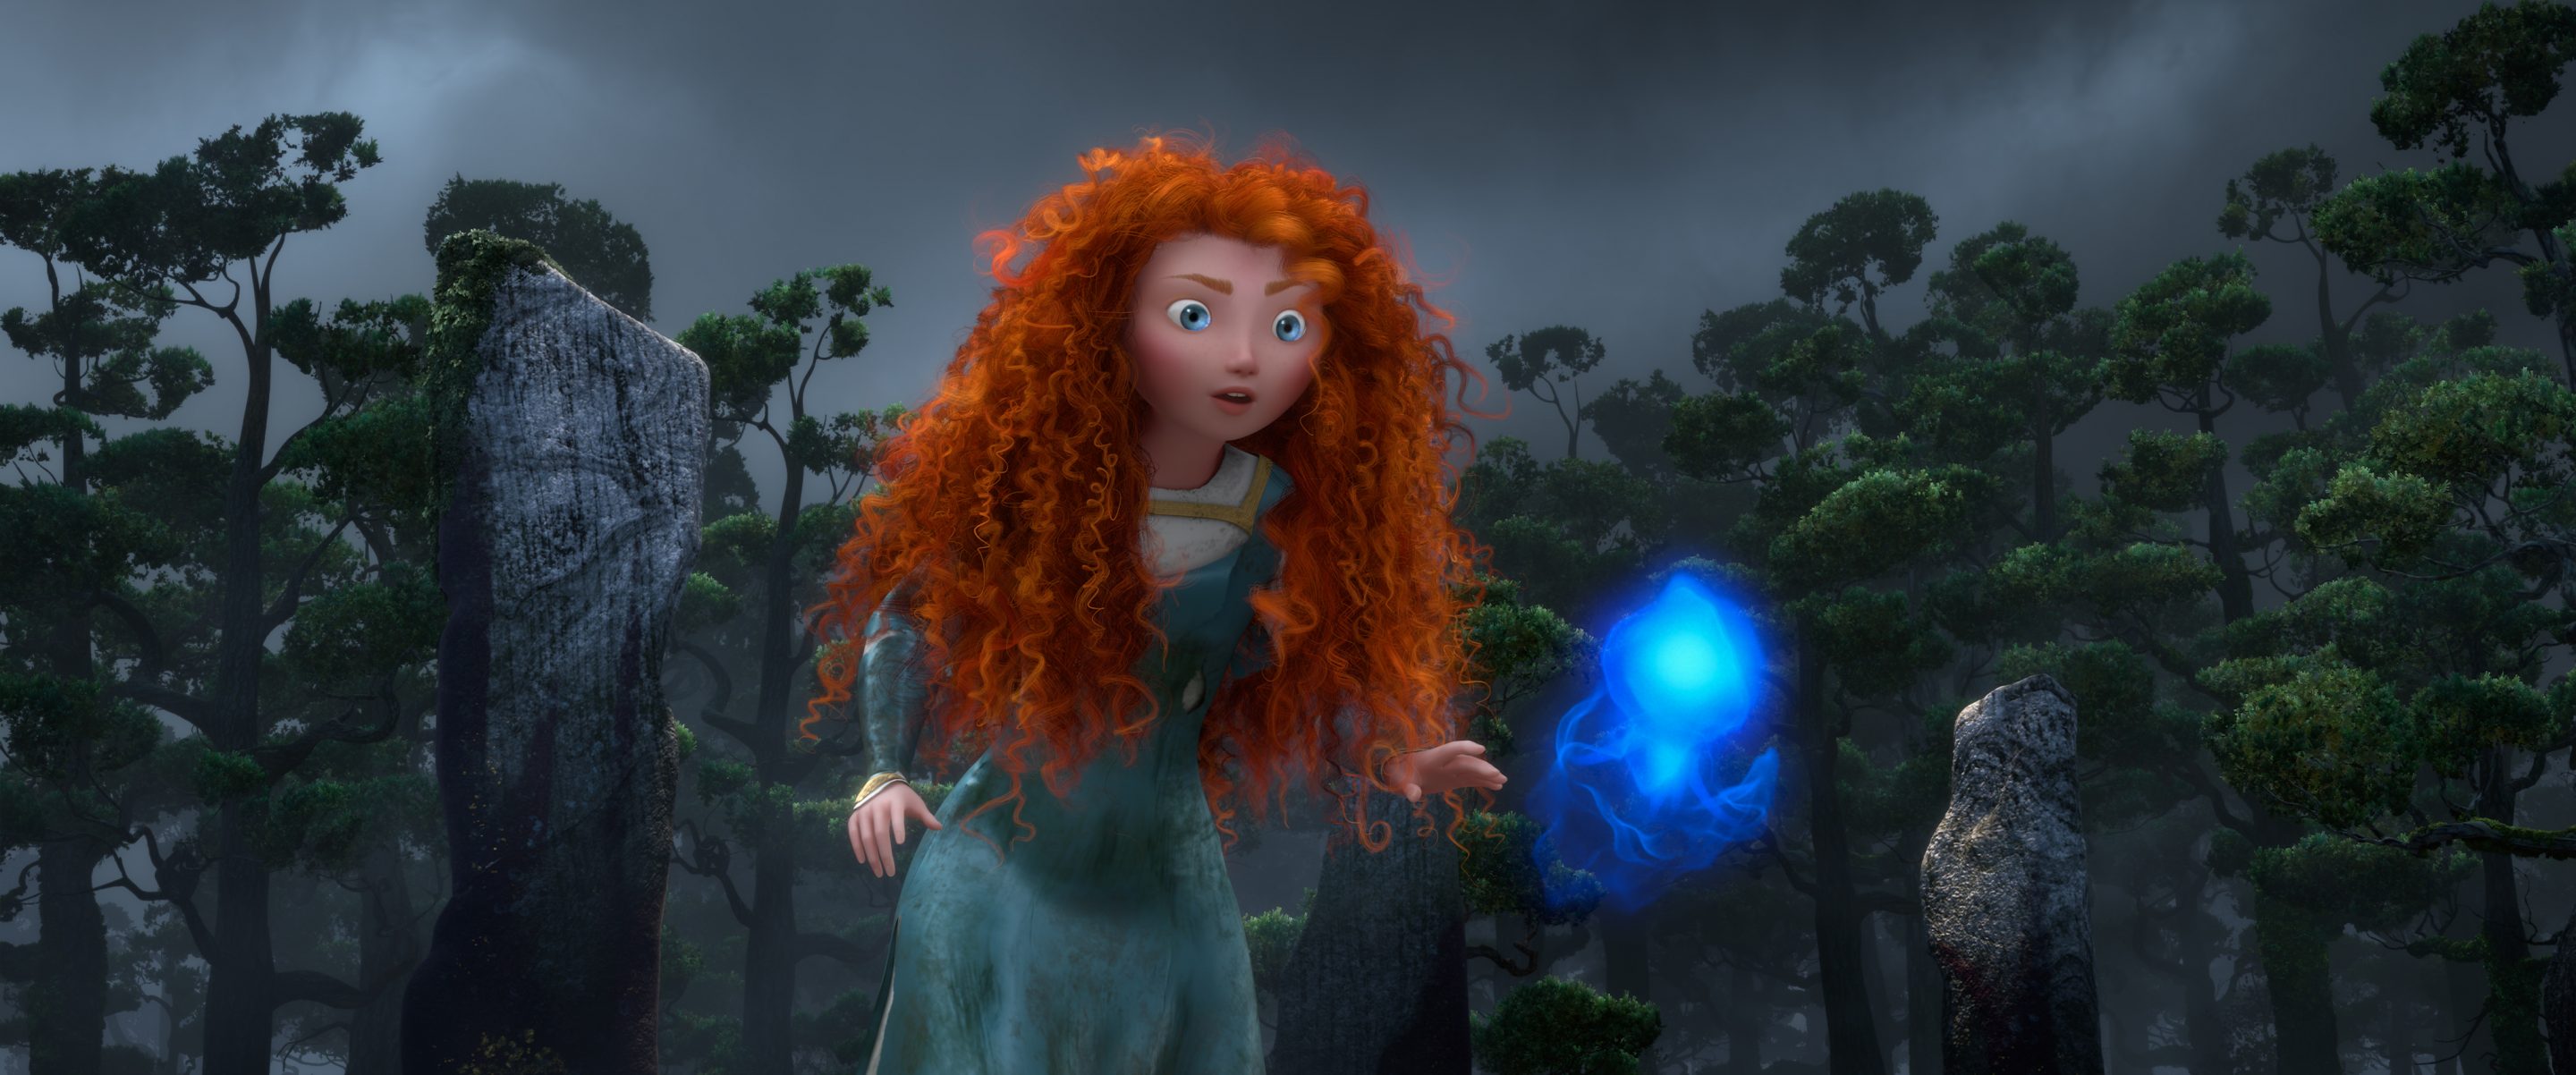 candace franklin recommends Brave Full Movie Free